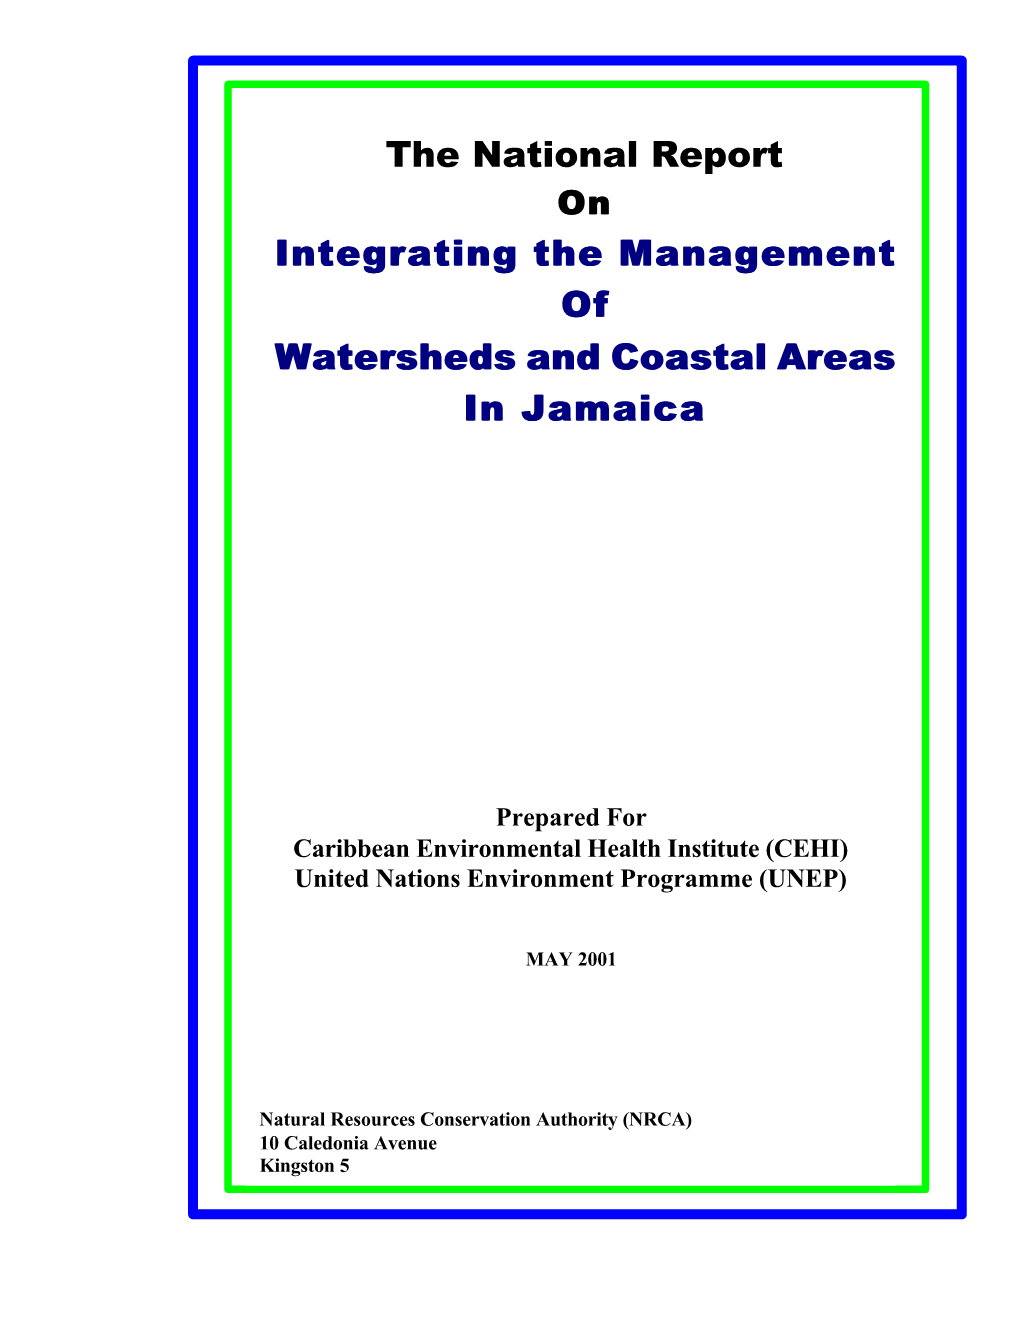 Integrating the Management of Watersheds and Coastal Areas in Jamaica in Jamaica